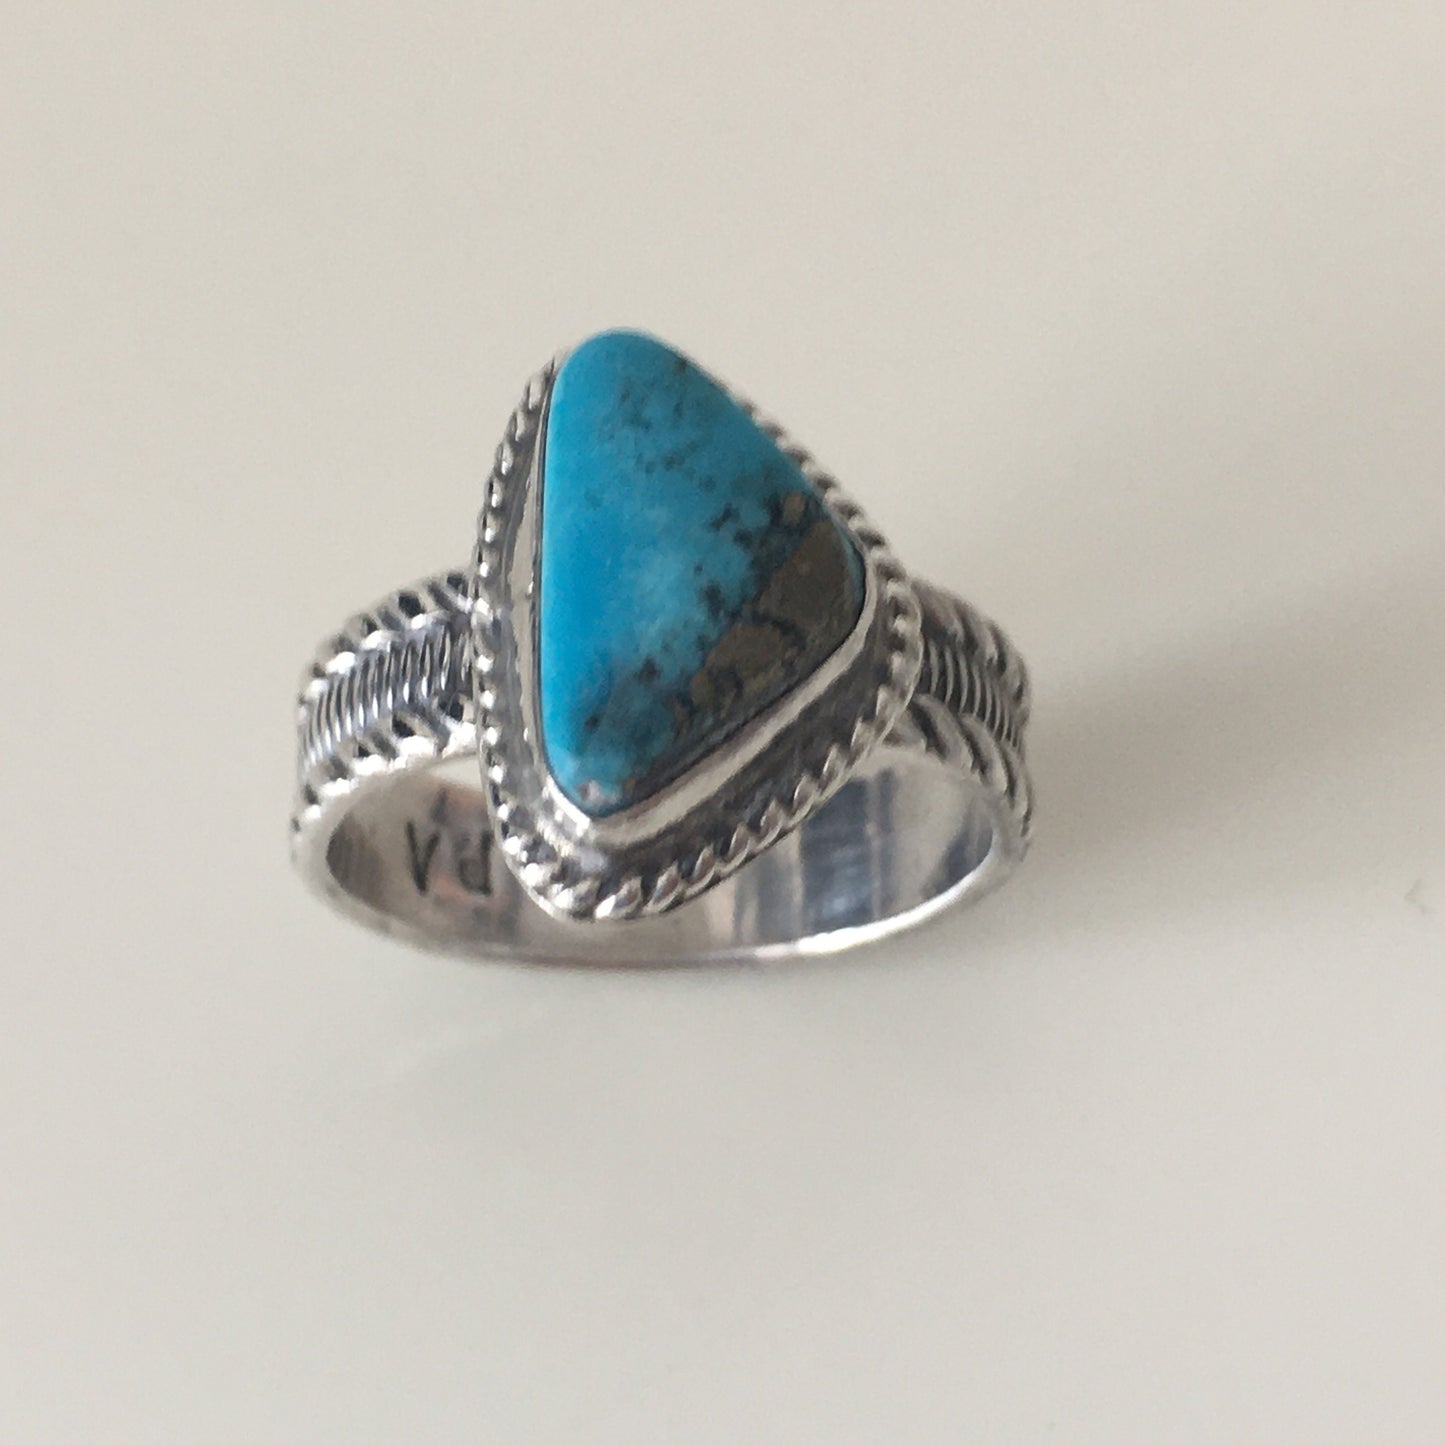 Vintage Navajo PRISCILLA APACHITO Turquoise Sterling Beaded Ring Handmade Ring Native American size 7.5